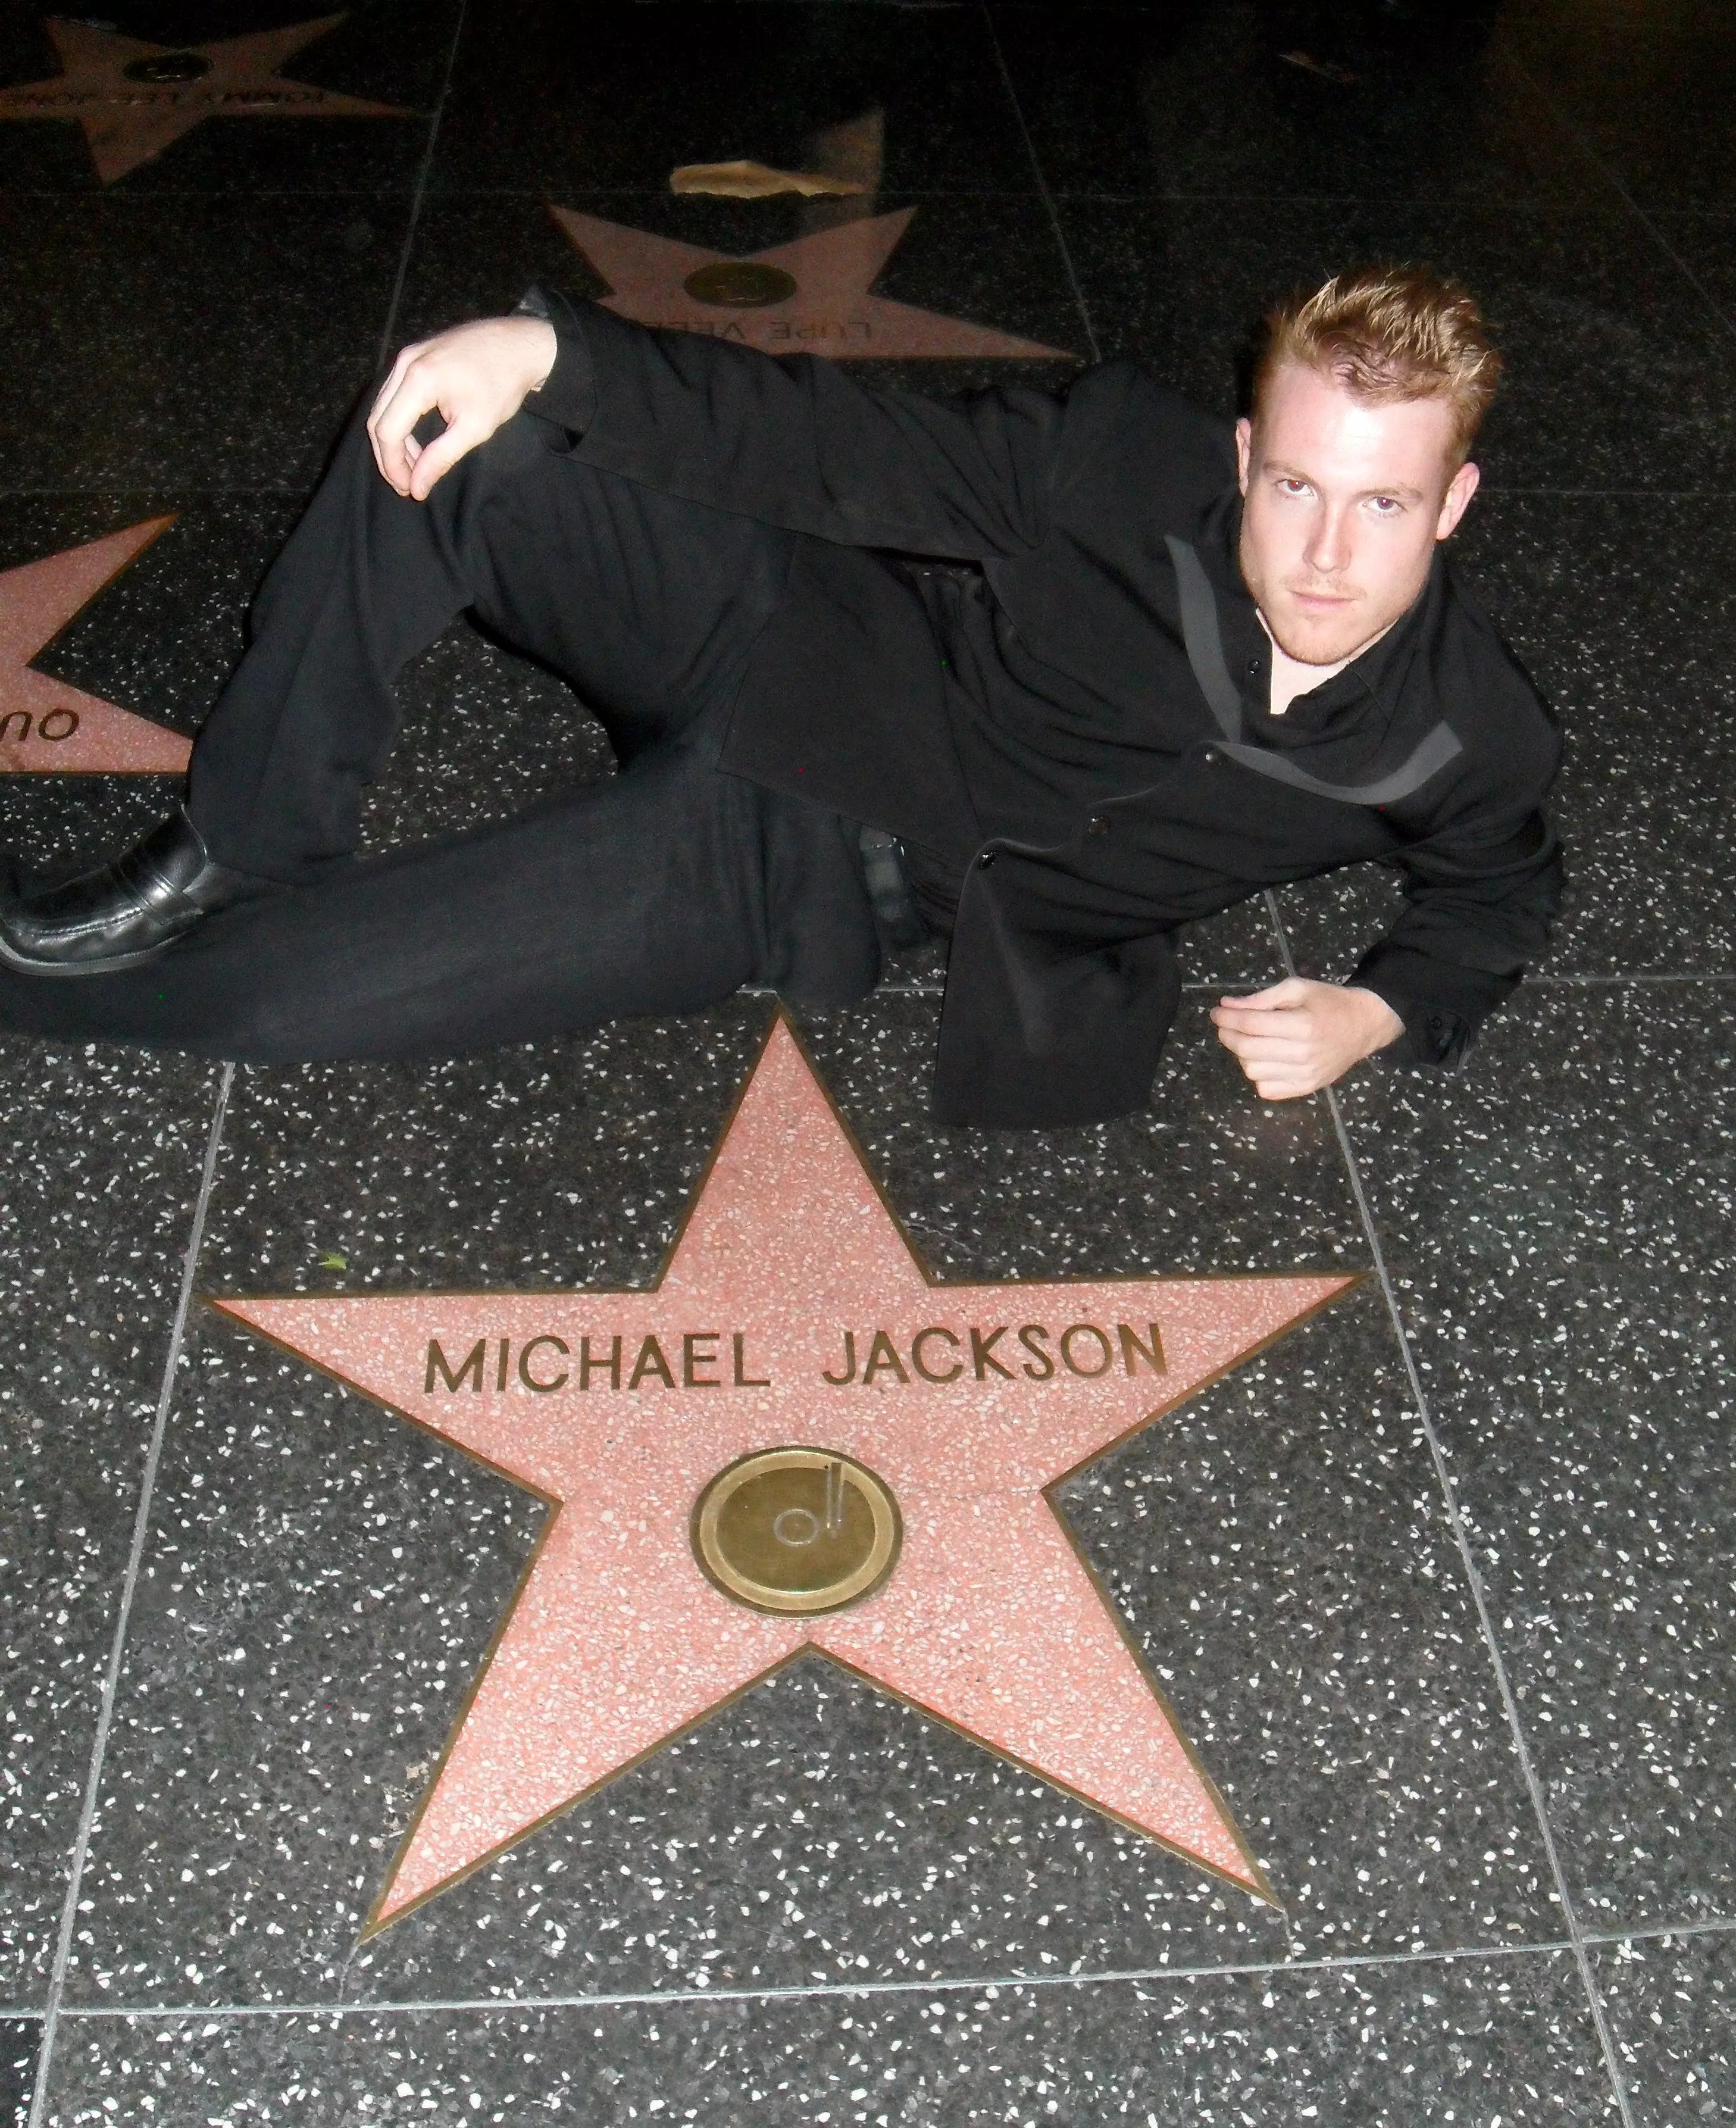 Cook next to Jackson's Star of Fame.